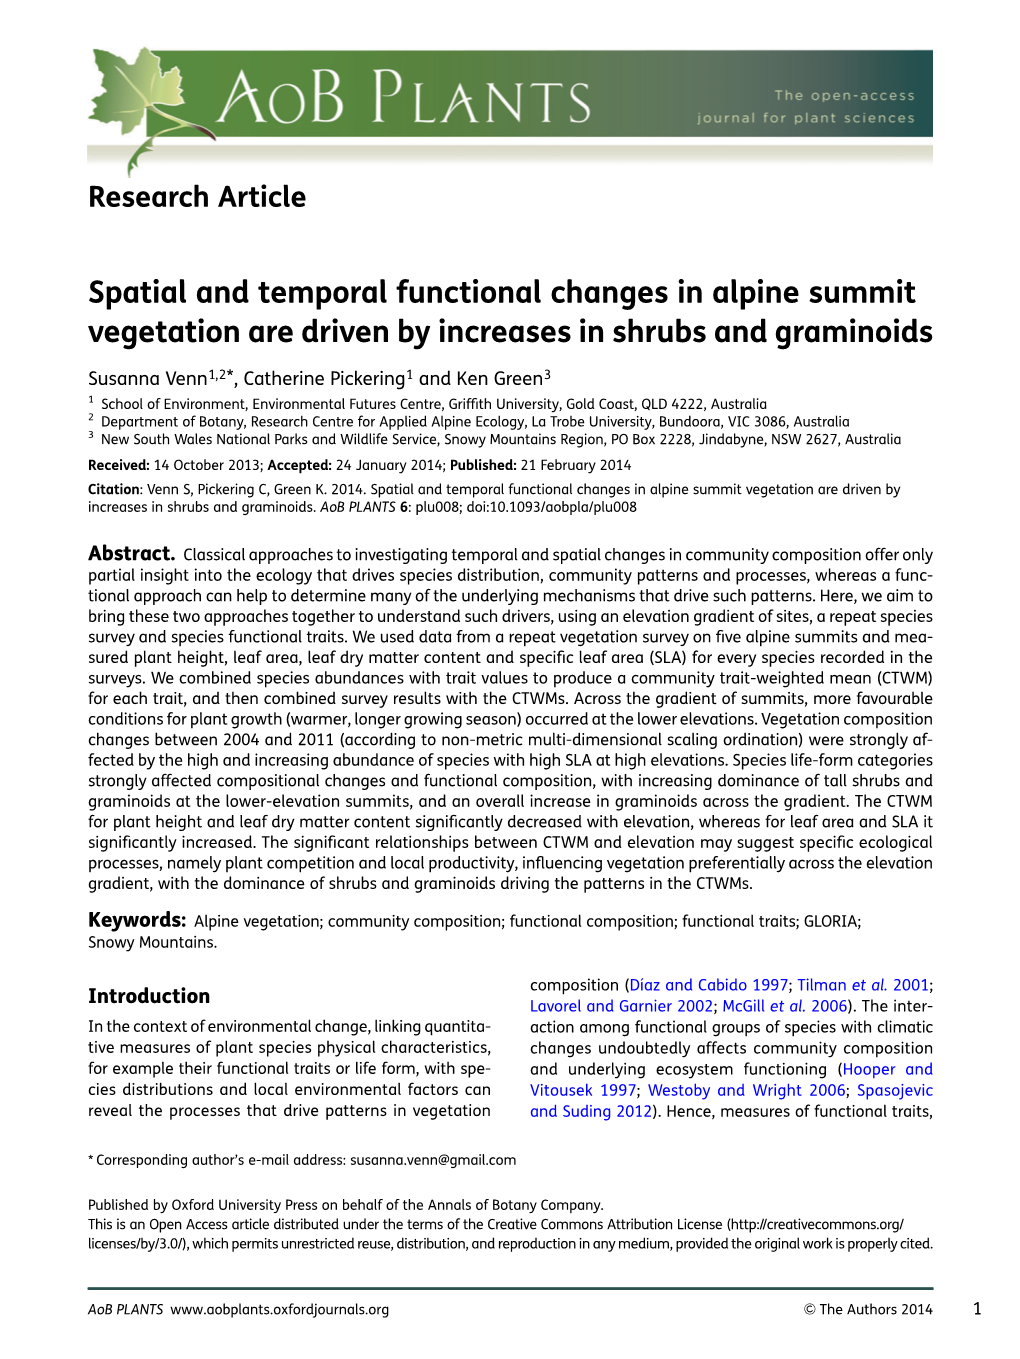 Spatial and Temporal Functional Changes in Alpine Summit Vegetation Are Driven by Increases in Shrubs and Graminoids